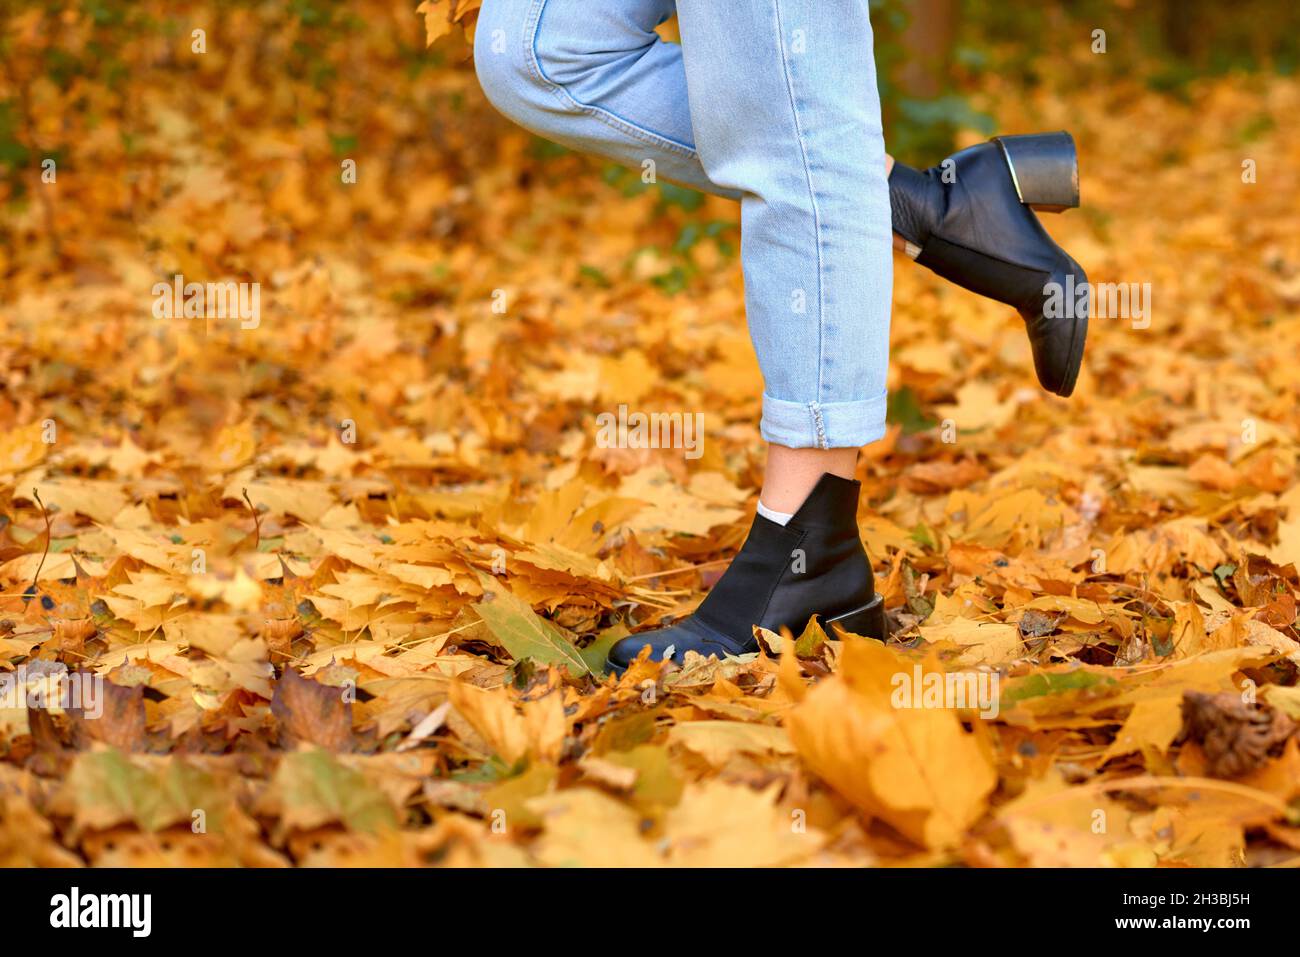 attractive slender female legs in jeans and boots stand in the fallen leaves. copy space. shallow depth of field Stock Photo